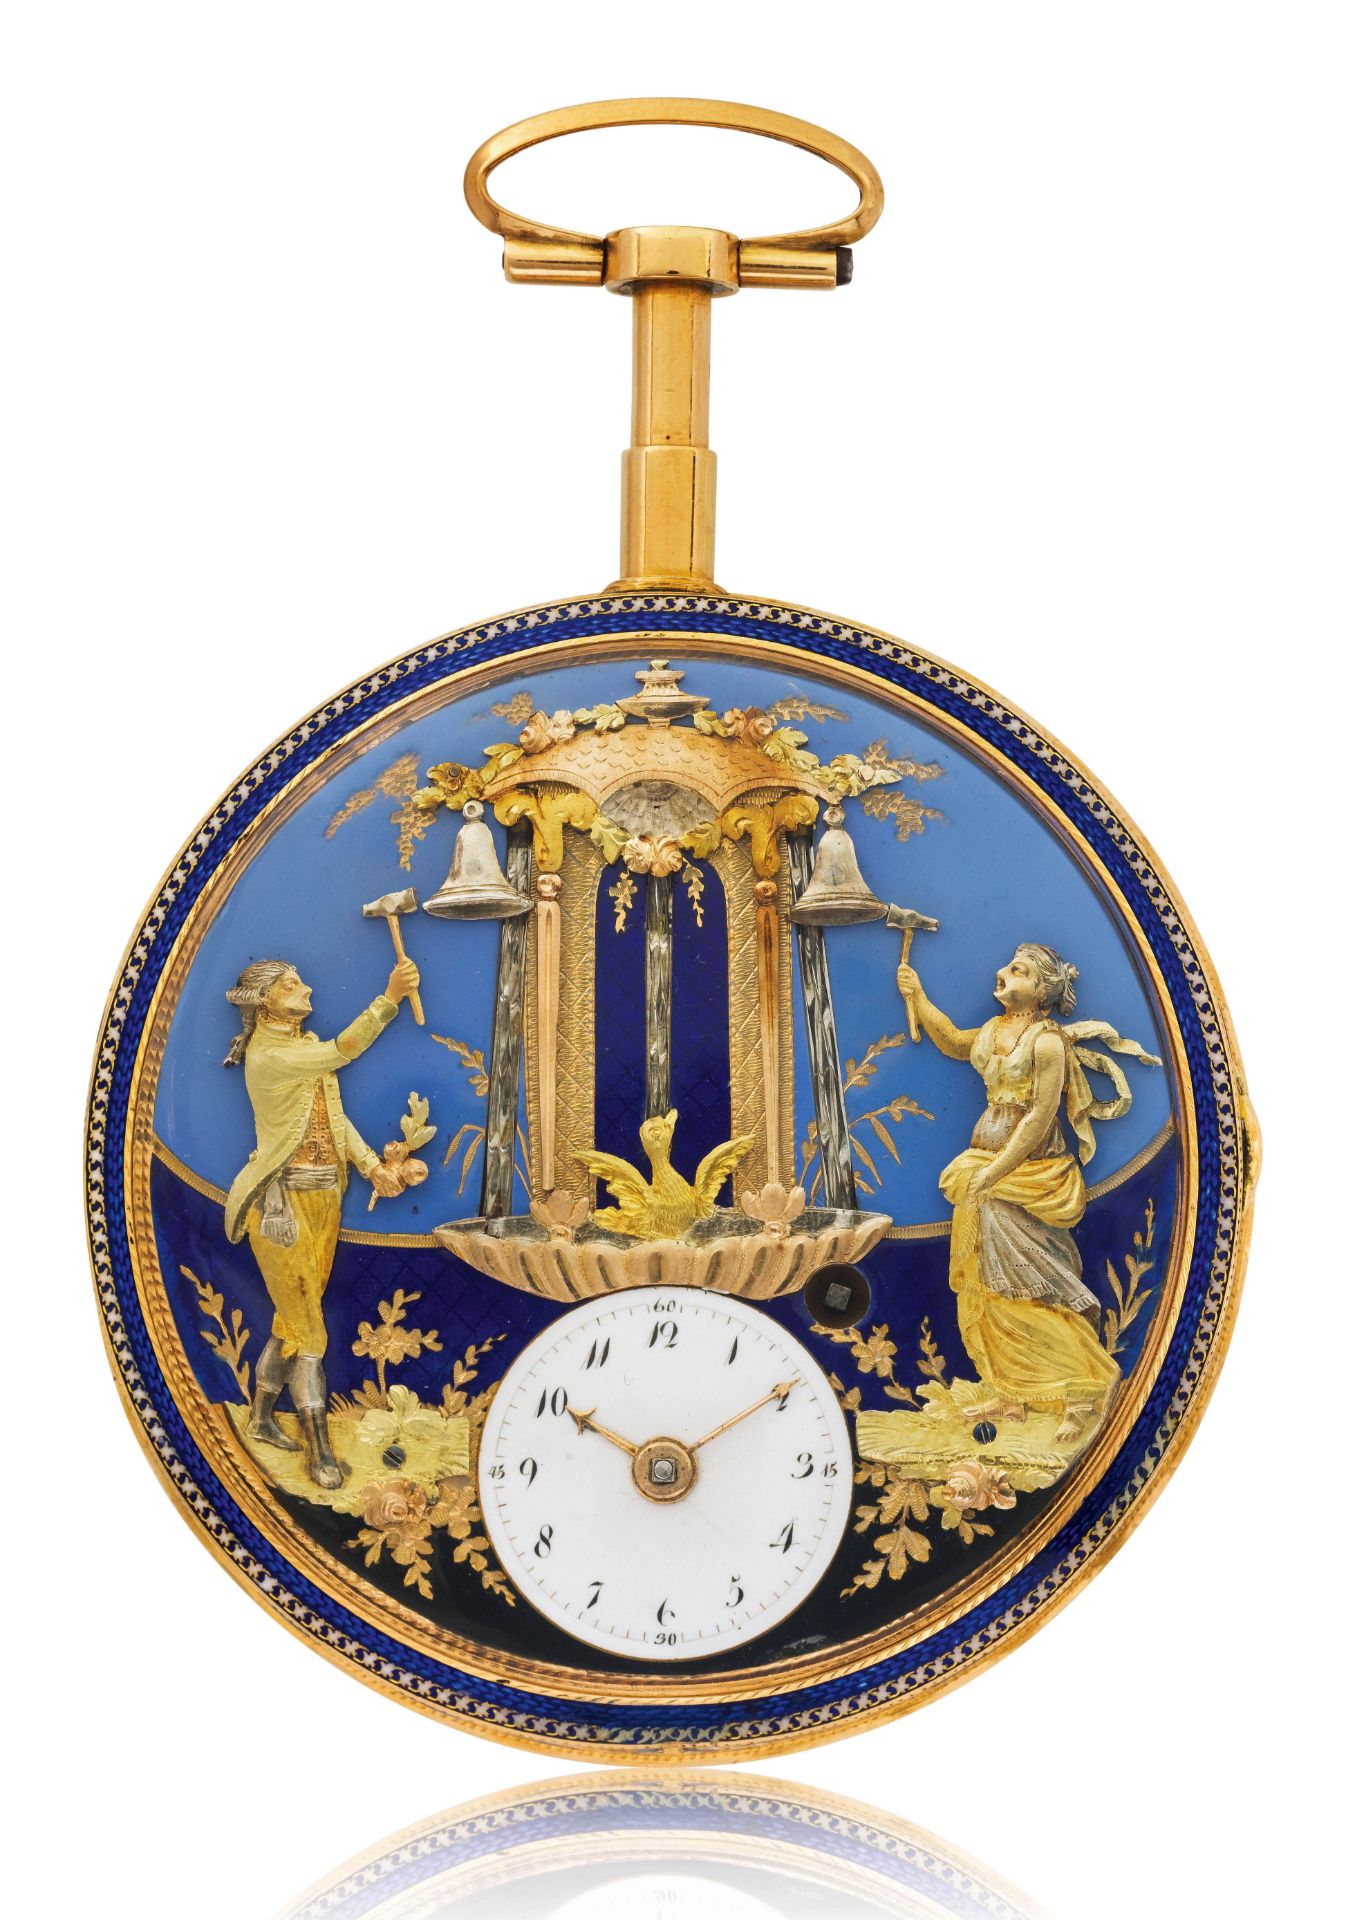 Veigneur Frères, extremely rare and large gold enamel pocket watch with 1/4-repeater and automation,